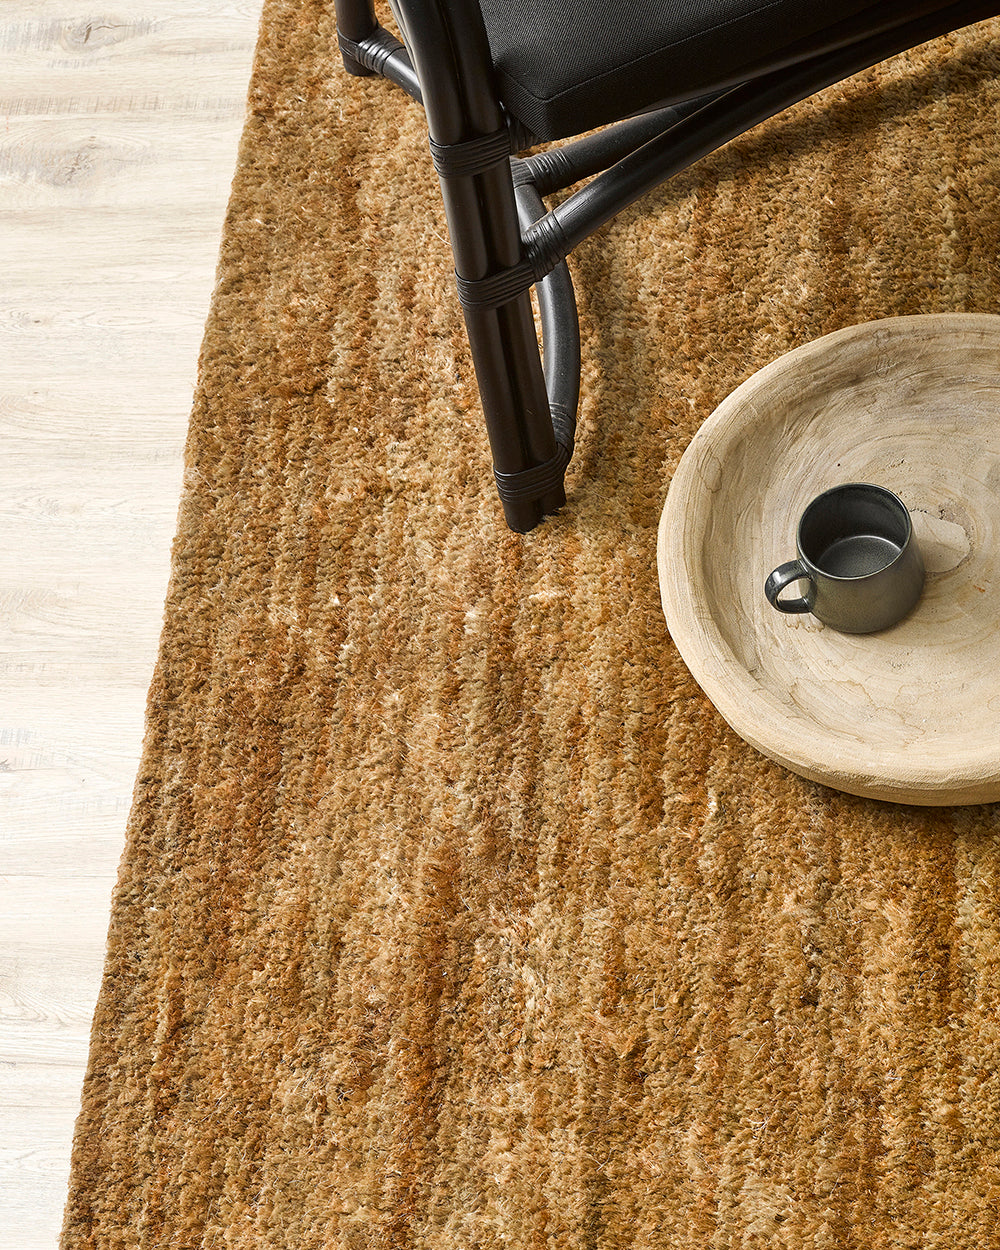 Pampas Natural Brown Rug from Baya Furtex Stockist Make Your House A Home, Furniture Store Bendigo. Free Australia Wide Delivery. Mulberi Rugs.